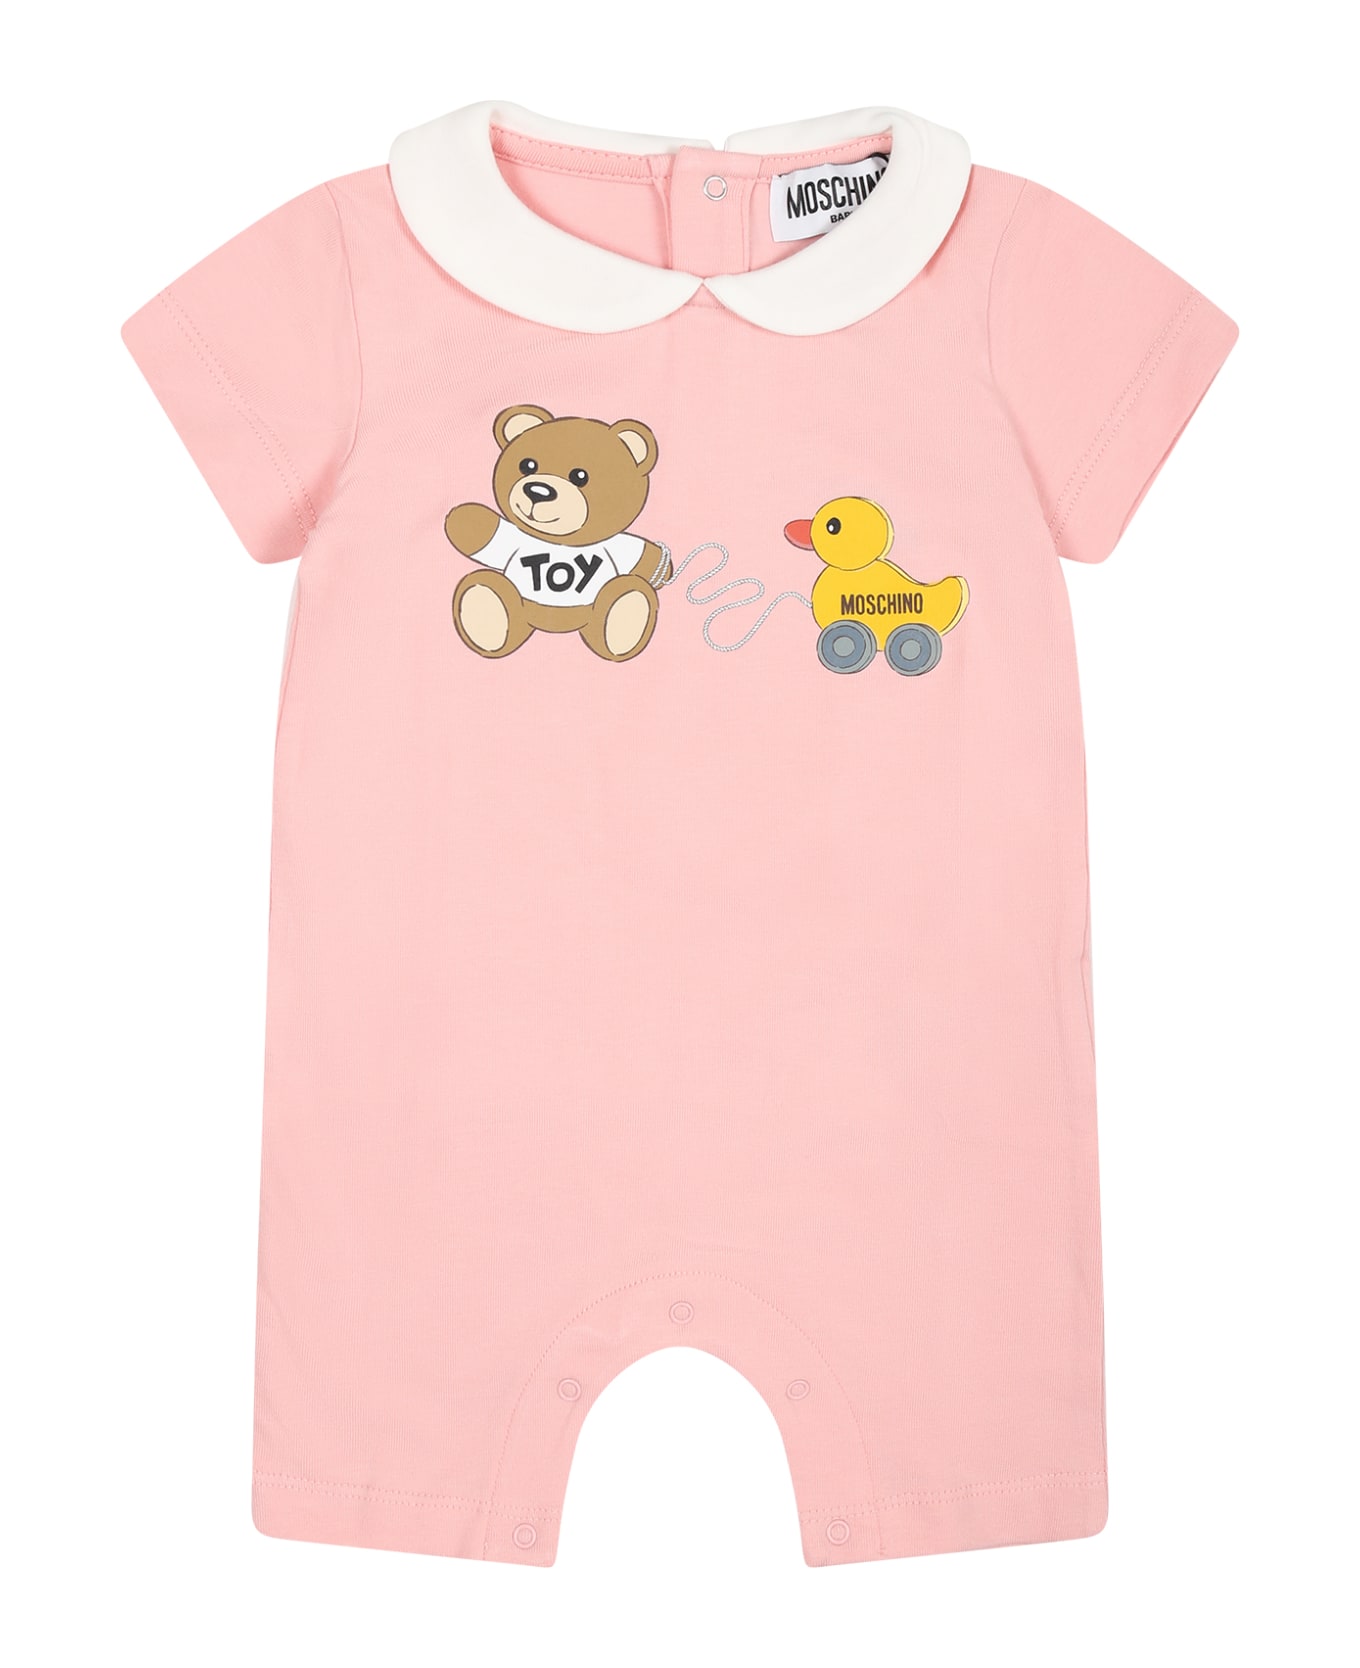 Moschino Pink Bodysuit For Baby Girl With Teddy Bear And Duck - Pink